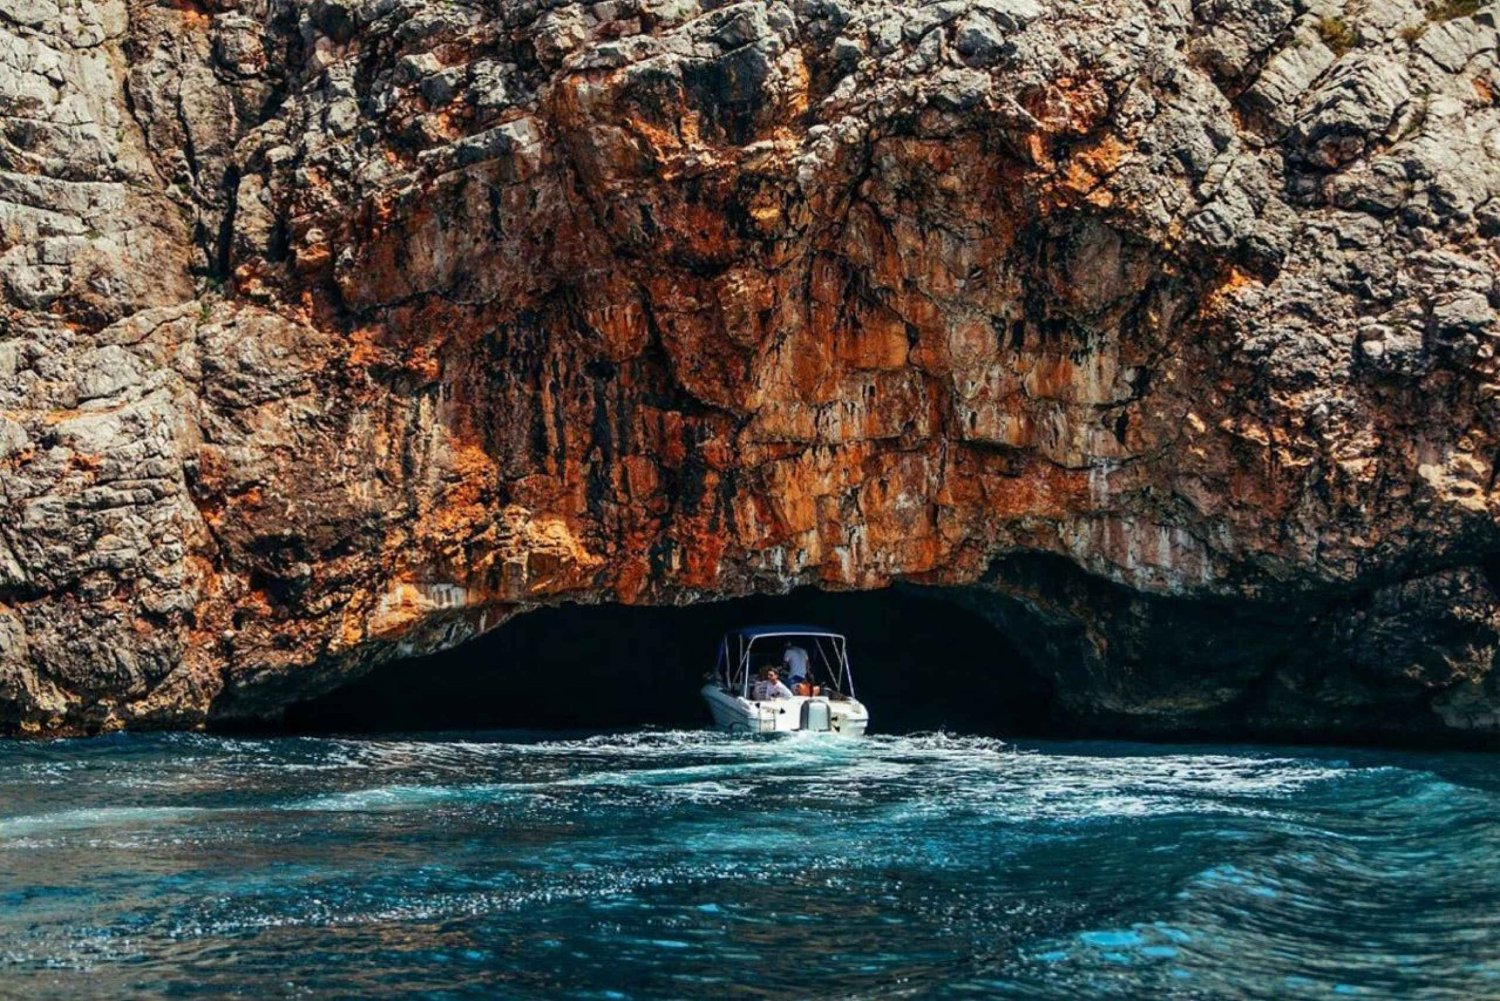 Boat tour from Tivat - Blue Cave and Lady of the Rocks 3h